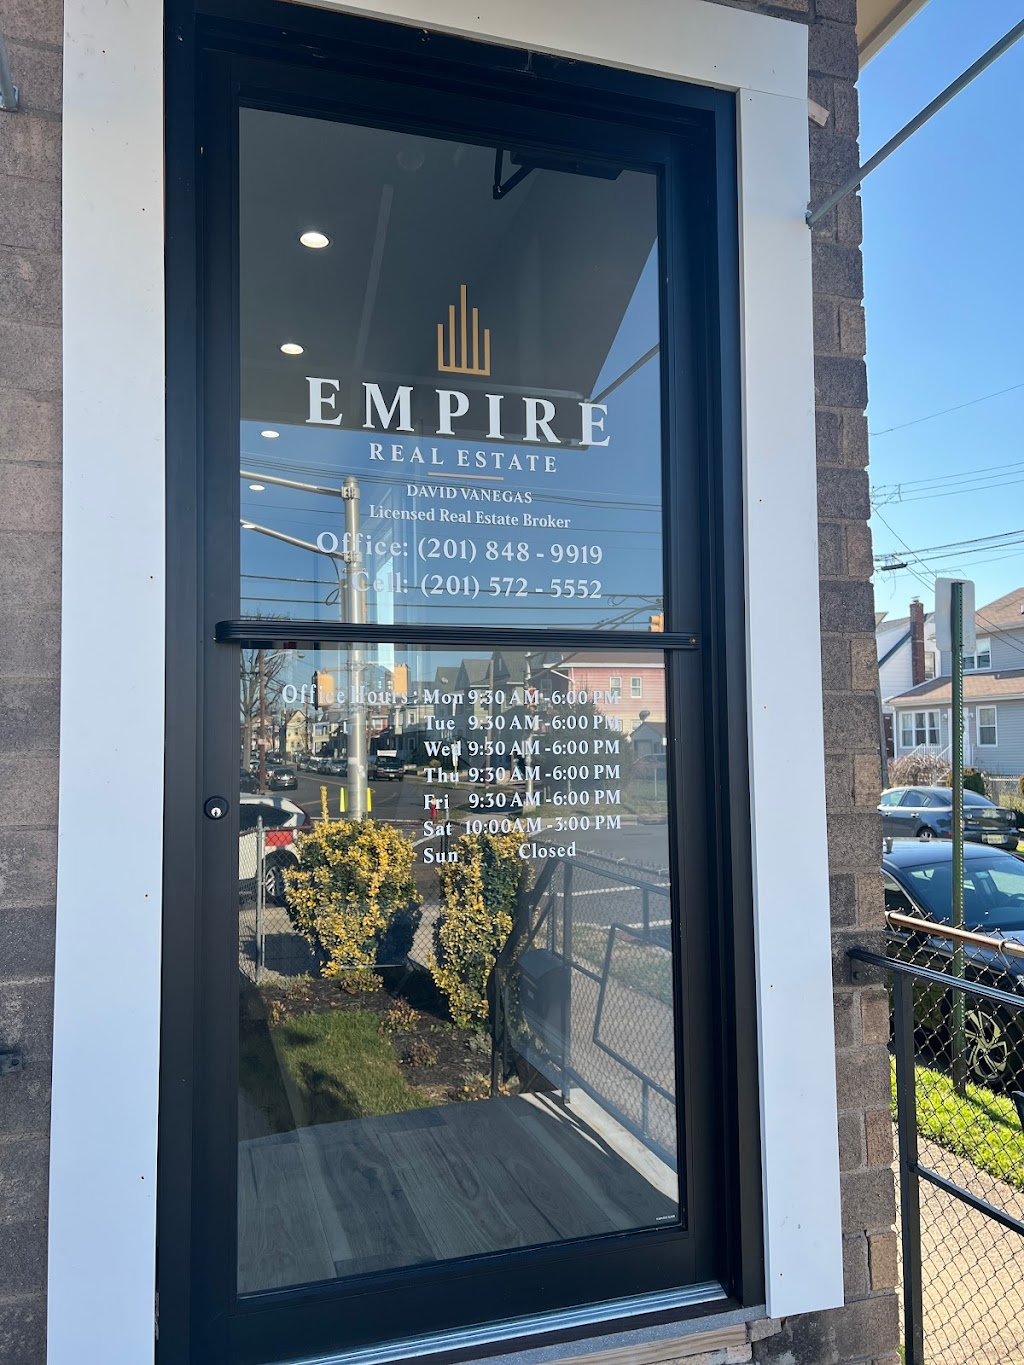 EMPIRE REAL ESTATE | 202 22nd Ave, Paterson, NJ 07513 | Phone: (201) 848-9919